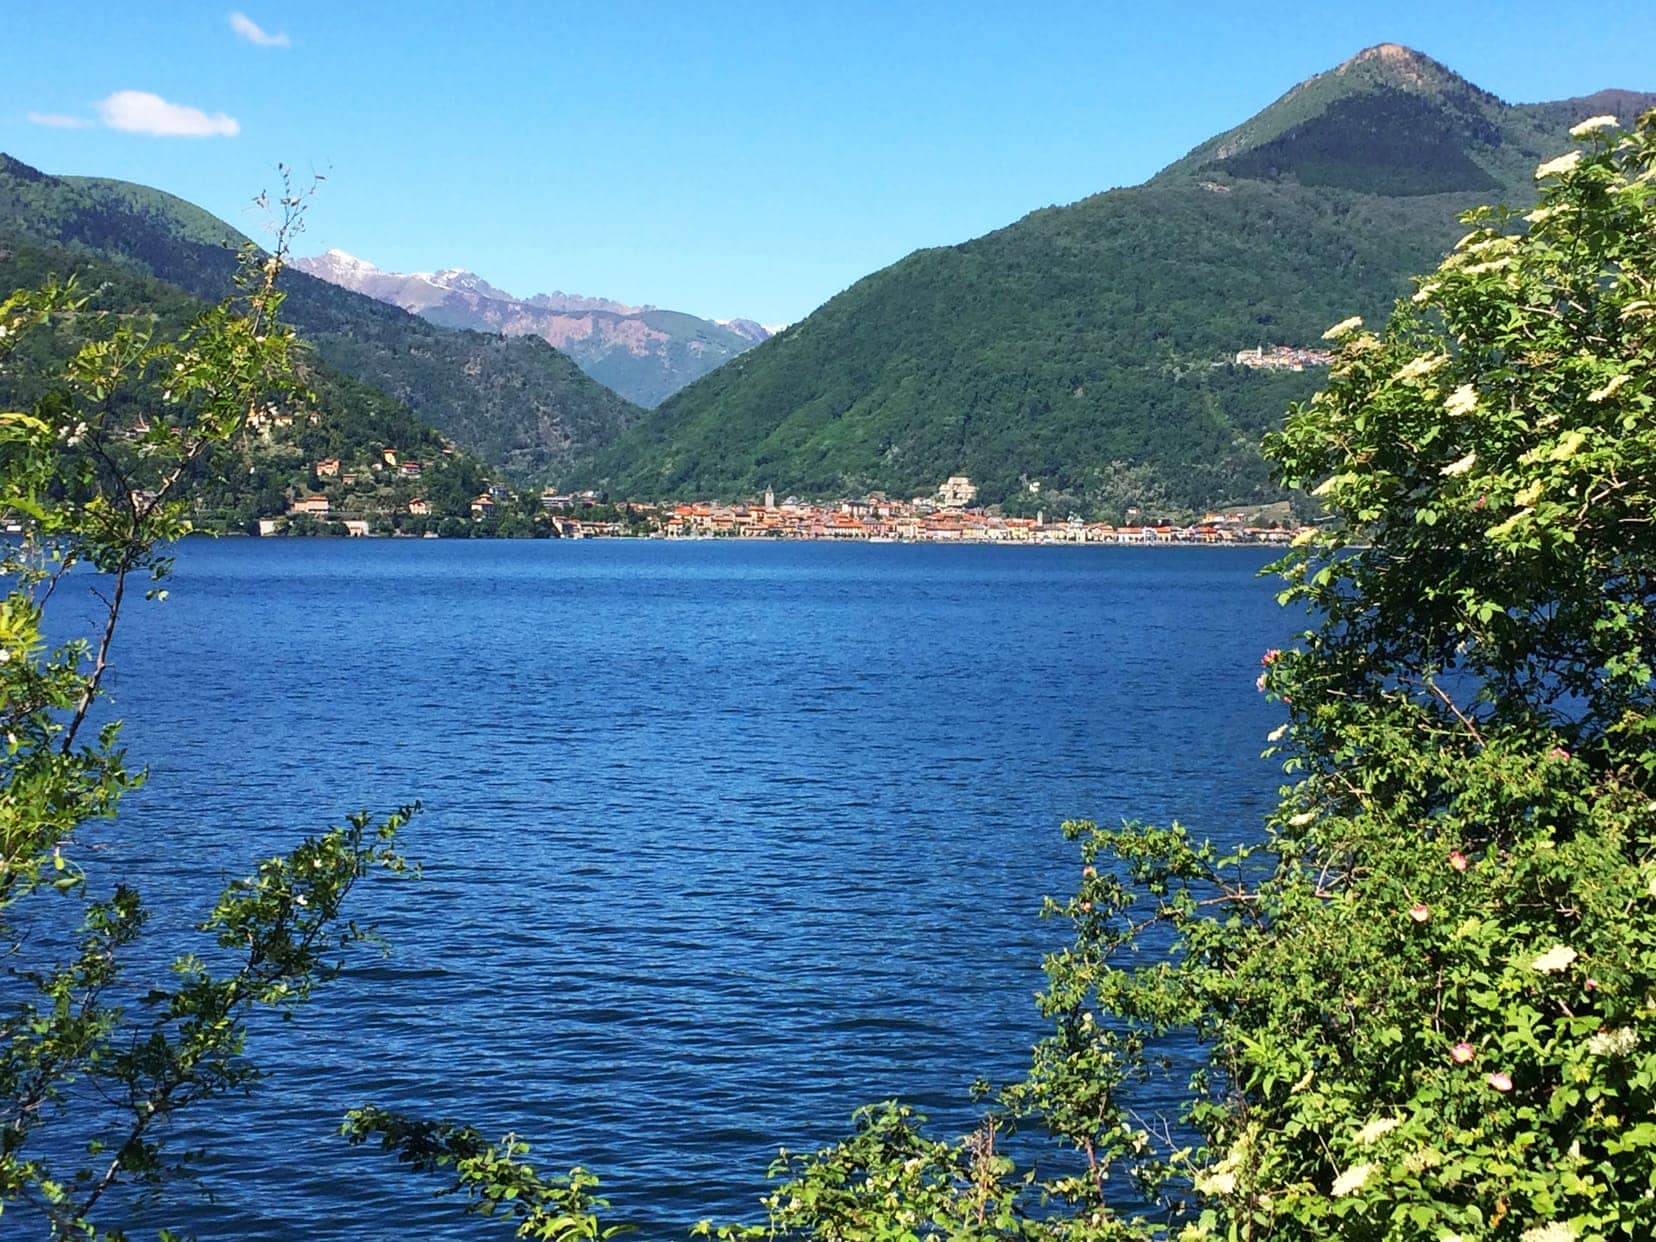 blue lake Maggiore with green mountains in the background on our italy by campervan trip